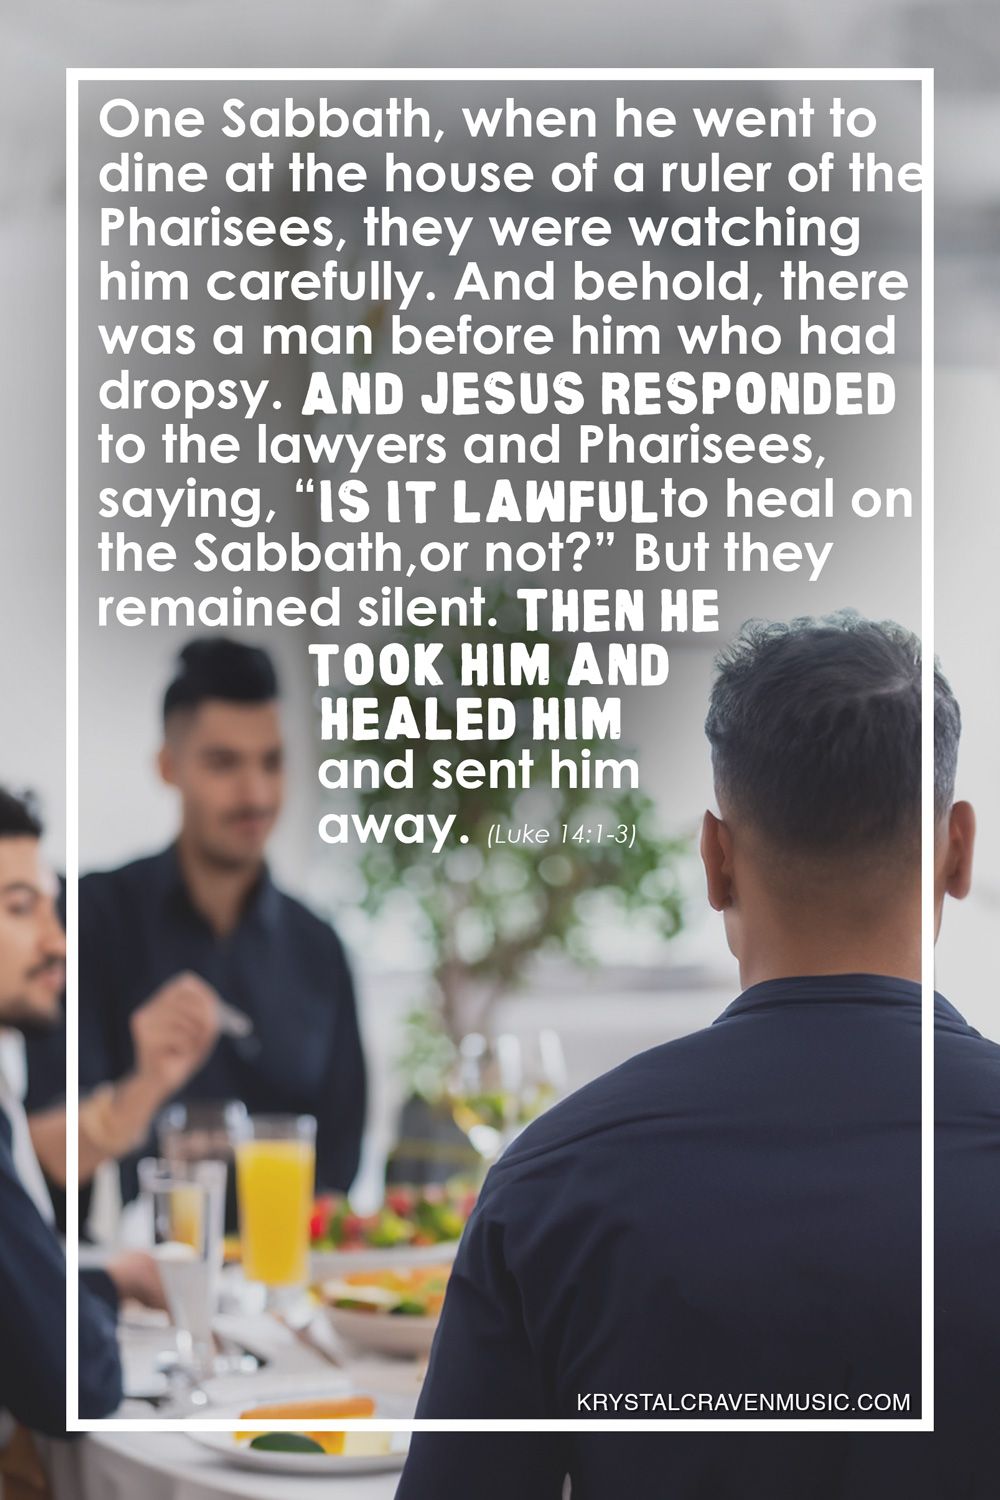 The text from Luke 14:1-3 "One Sabbath, when he went to dine at the house of a ruler of the Pharisees, they were watching him carefully. And behold, there was a man before him who had dropsy. And Jesus responded to the lawyers and Pharisees, saying, “Is it lawful to heal on the Sabbath, or not?” But they remained silent. Then he took him and healed him and sent him away." over a picture of the back of a man sitting at a table with other men.